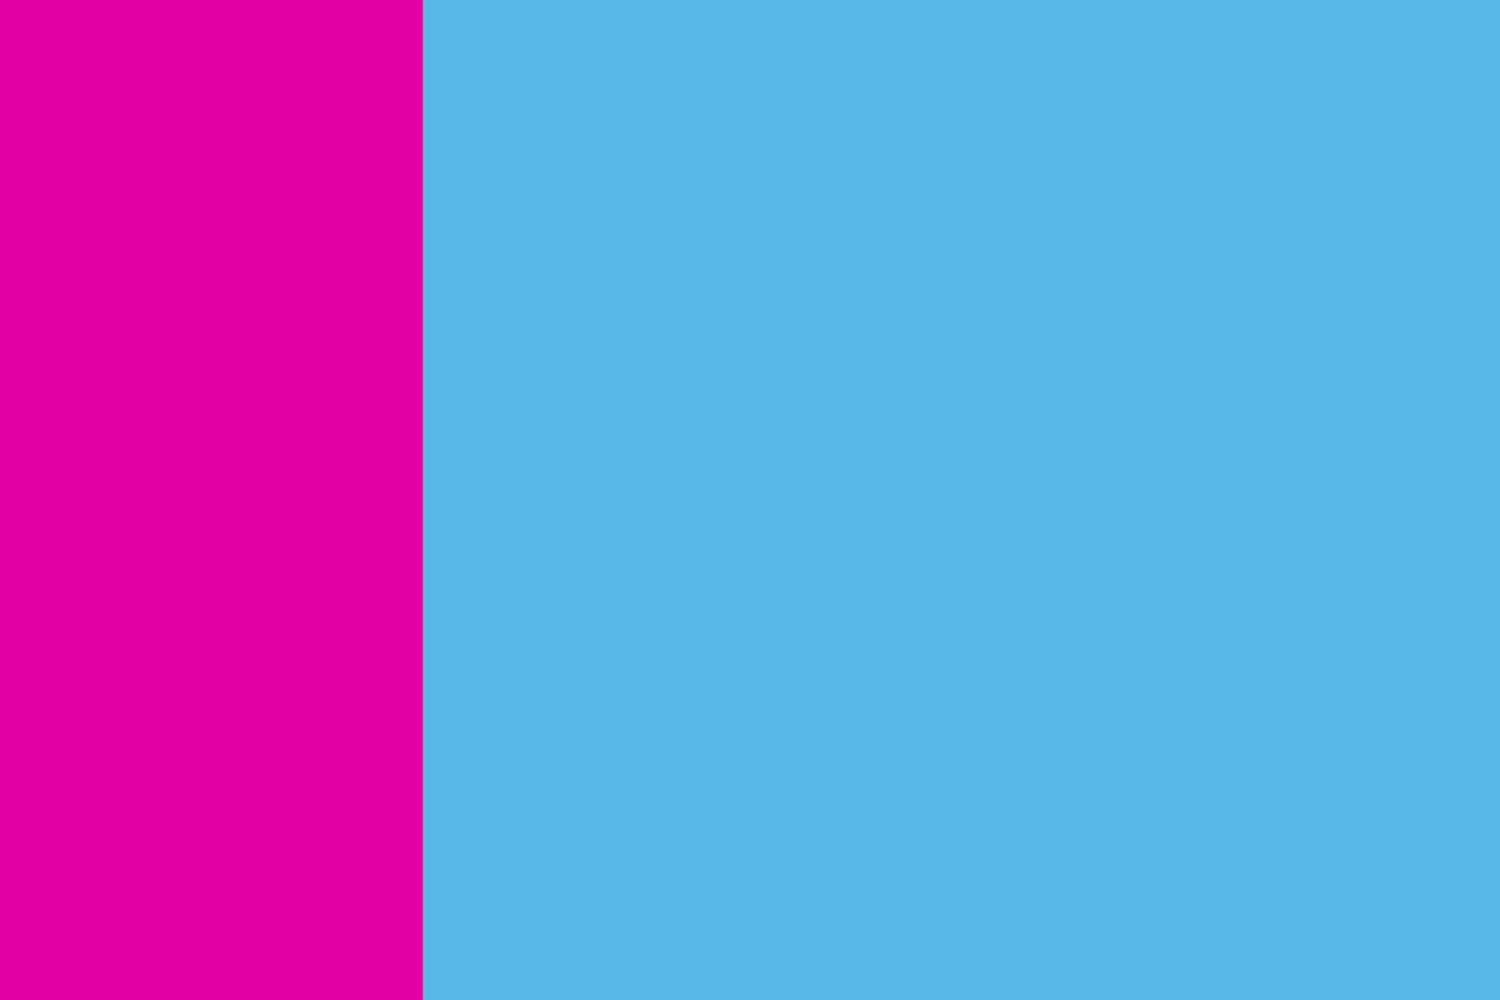 background image in pink and blue